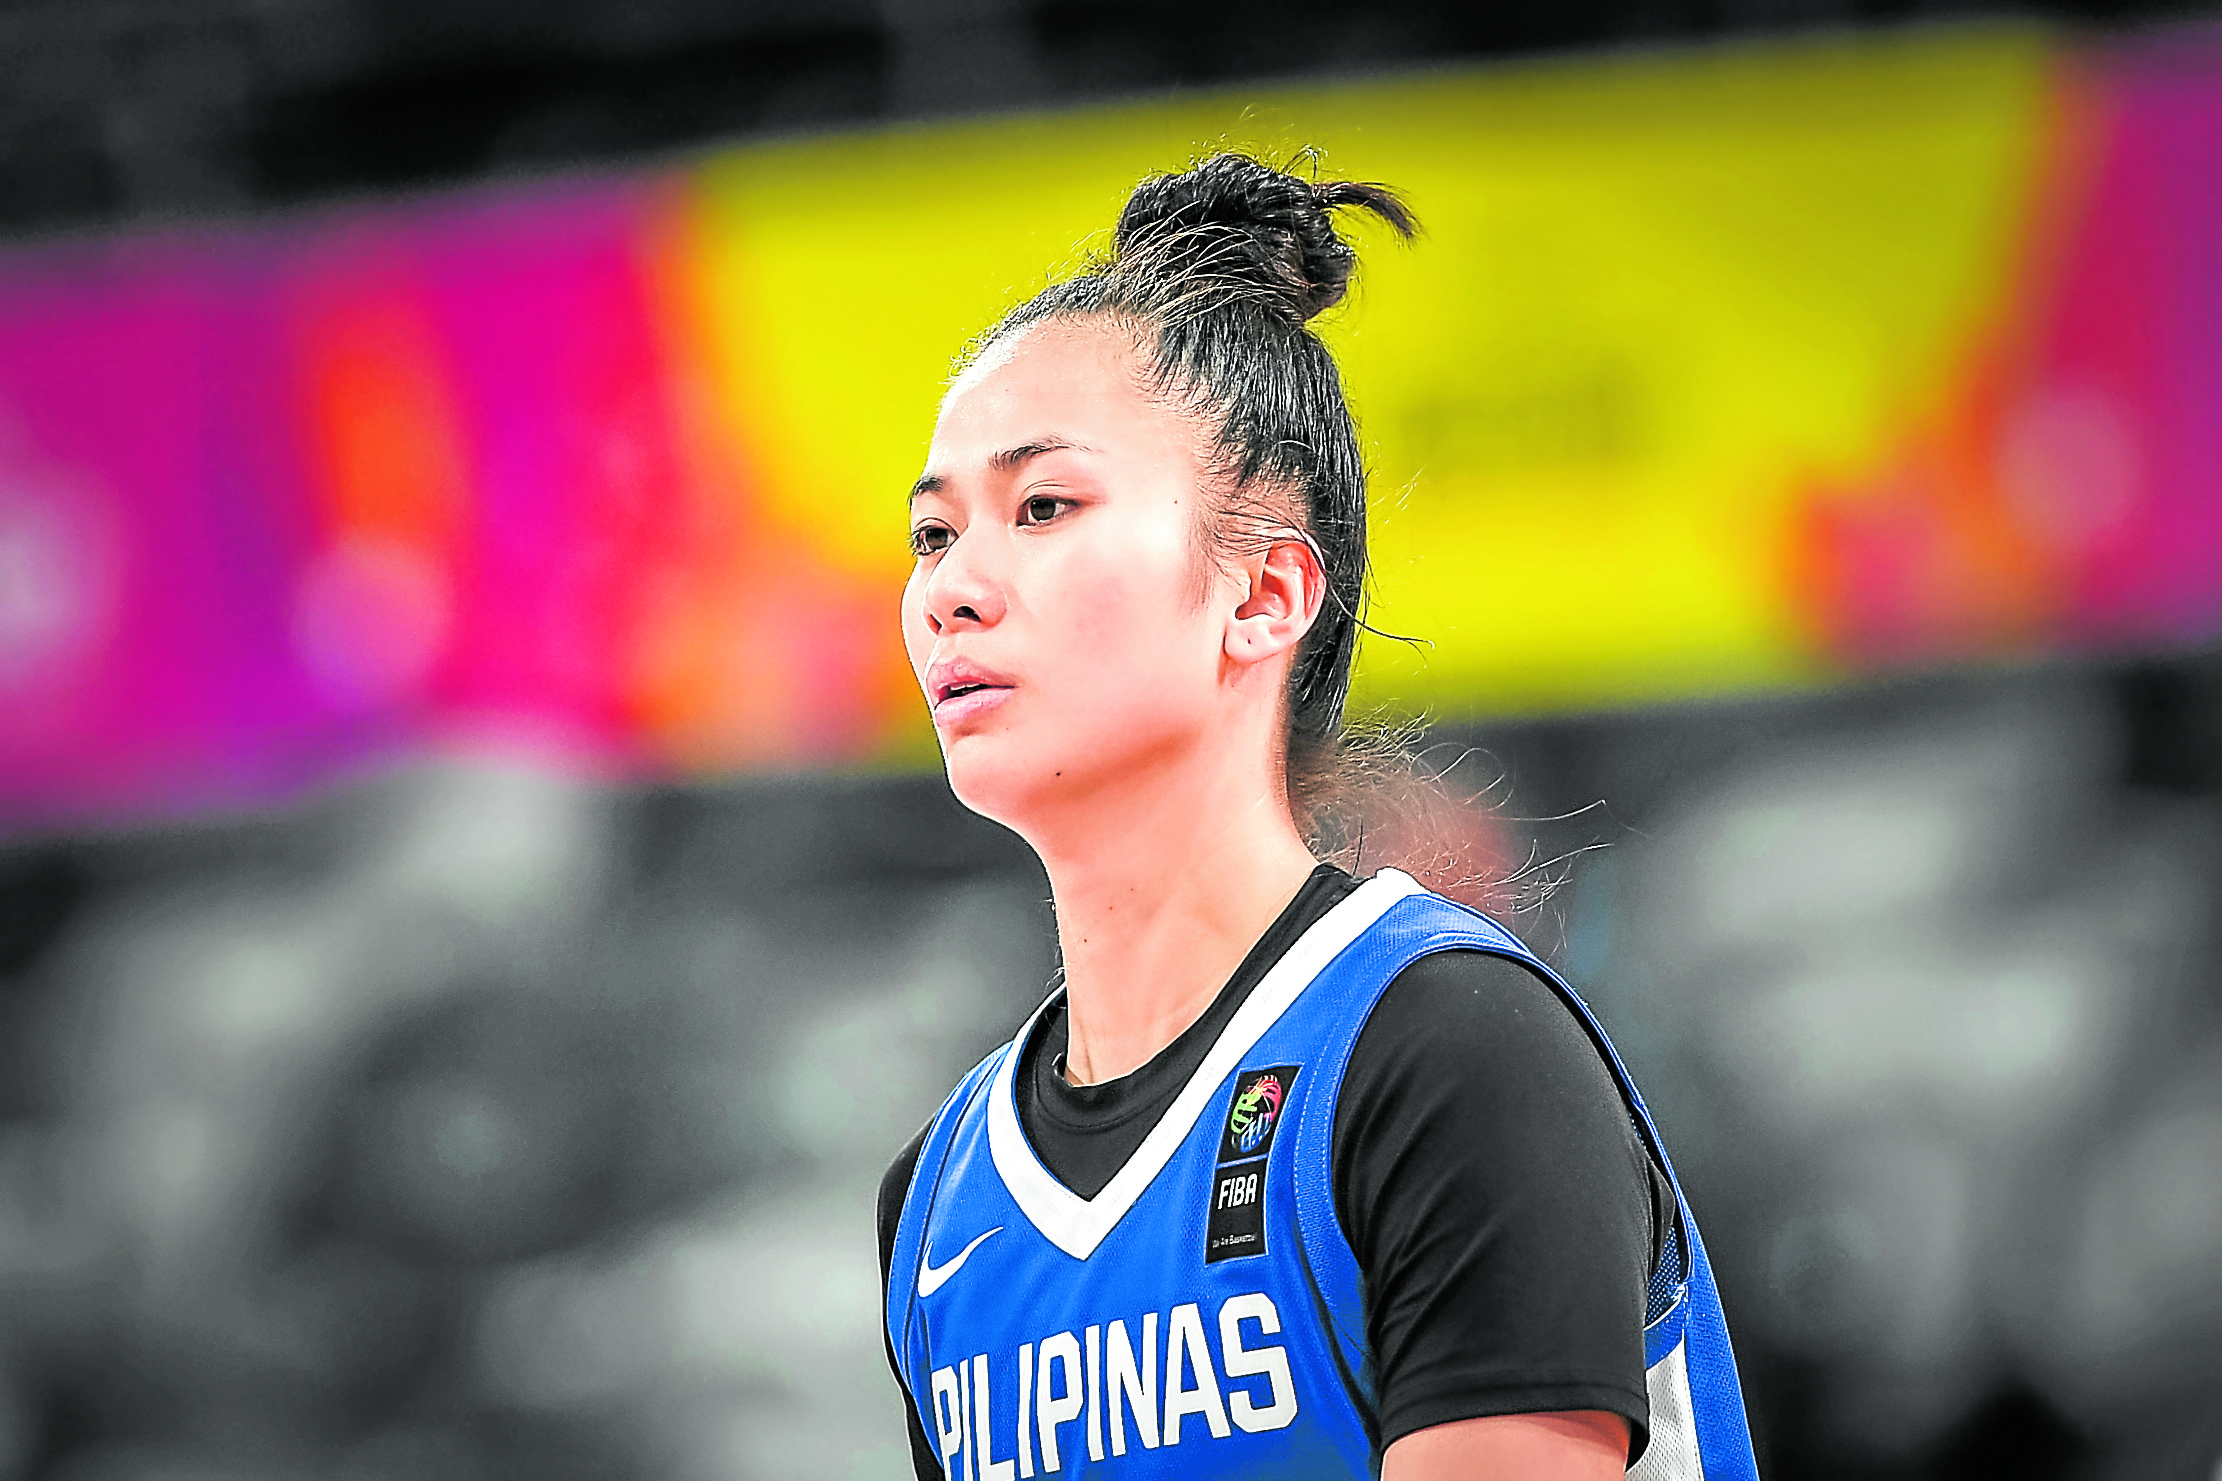 Jhazmin Joson proved worthy as afuture cornerstone of the program by stepping up her offense when needed most. —PHOTO BY FIBA ASIA